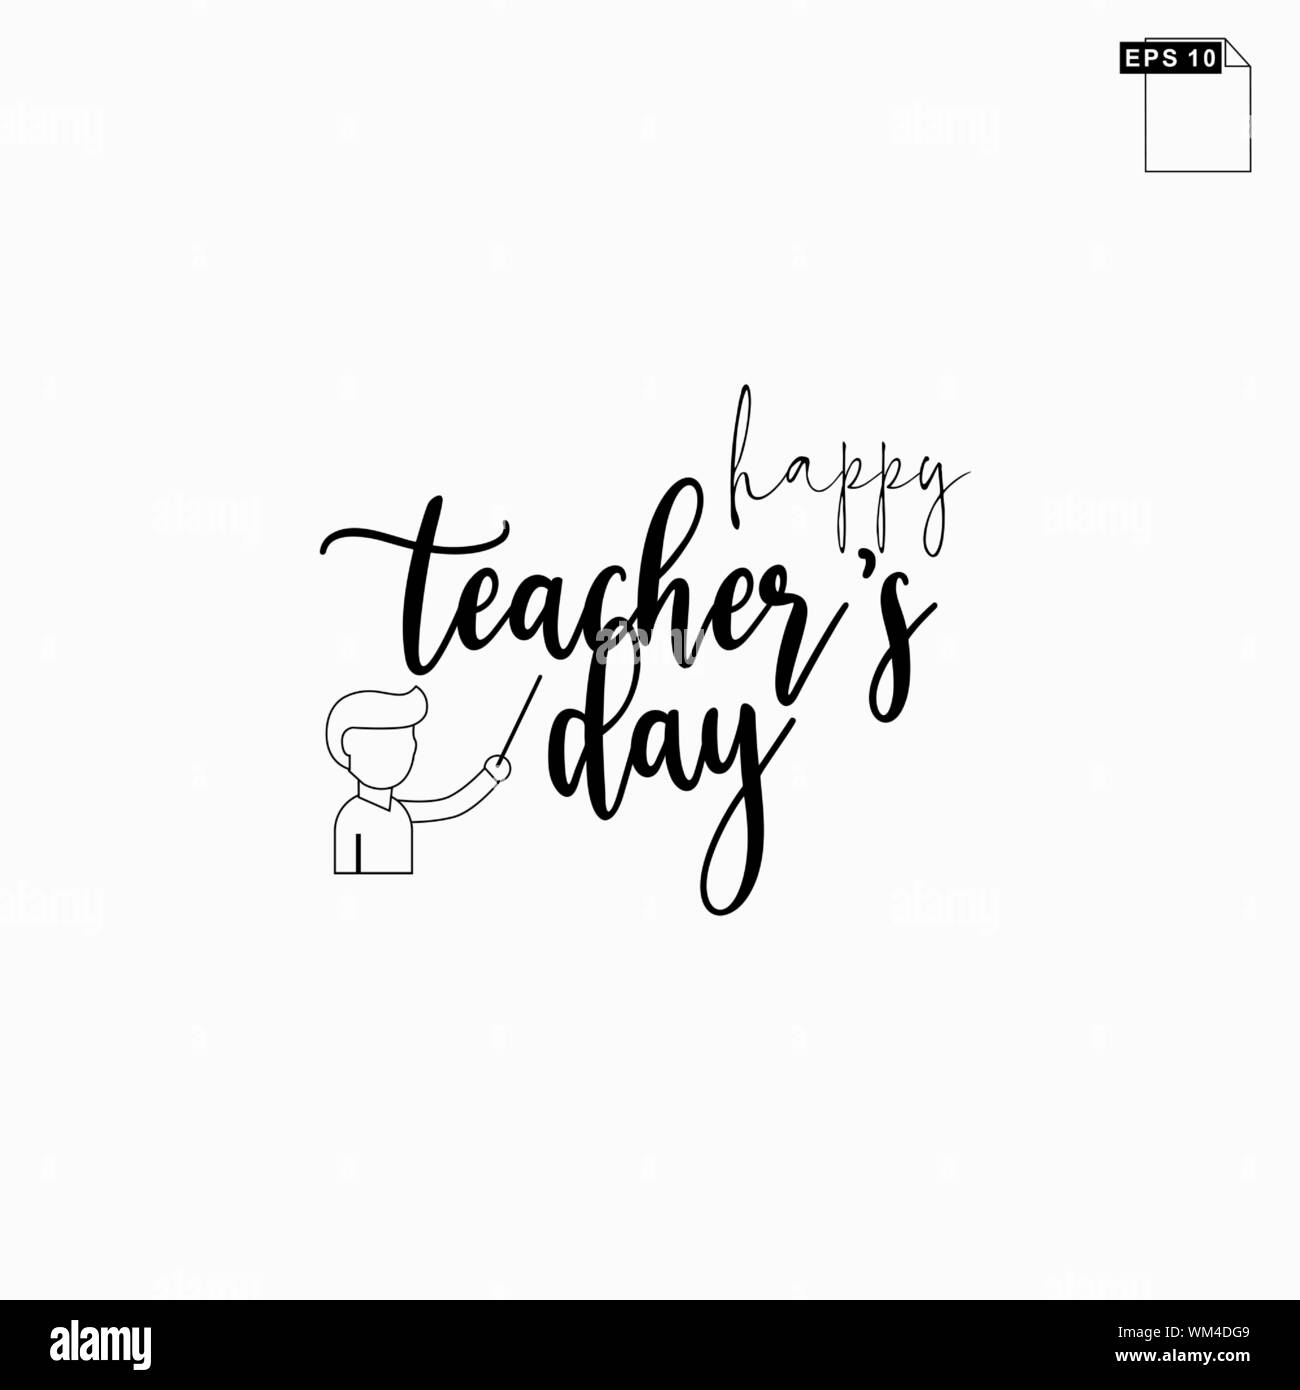 Happy teacher day Cut Out Stock Images & Pictures - Alamy